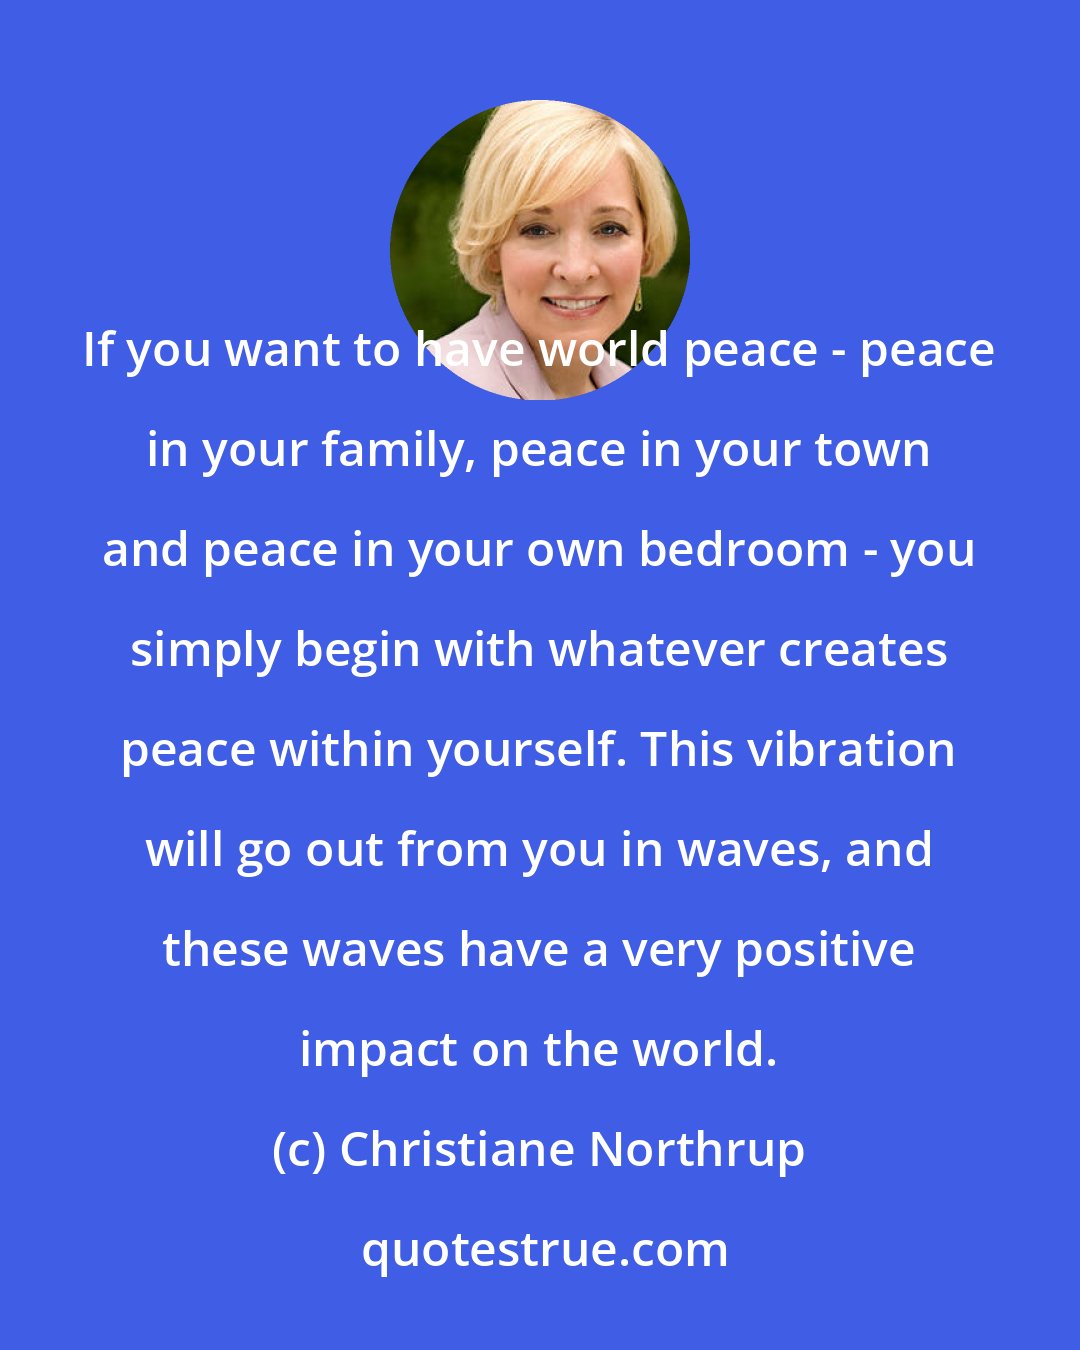 Christiane Northrup: If you want to have world peace - peace in your family, peace in your town and peace in your own bedroom - you simply begin with whatever creates peace within yourself. This vibration will go out from you in waves, and these waves have a very positive impact on the world.